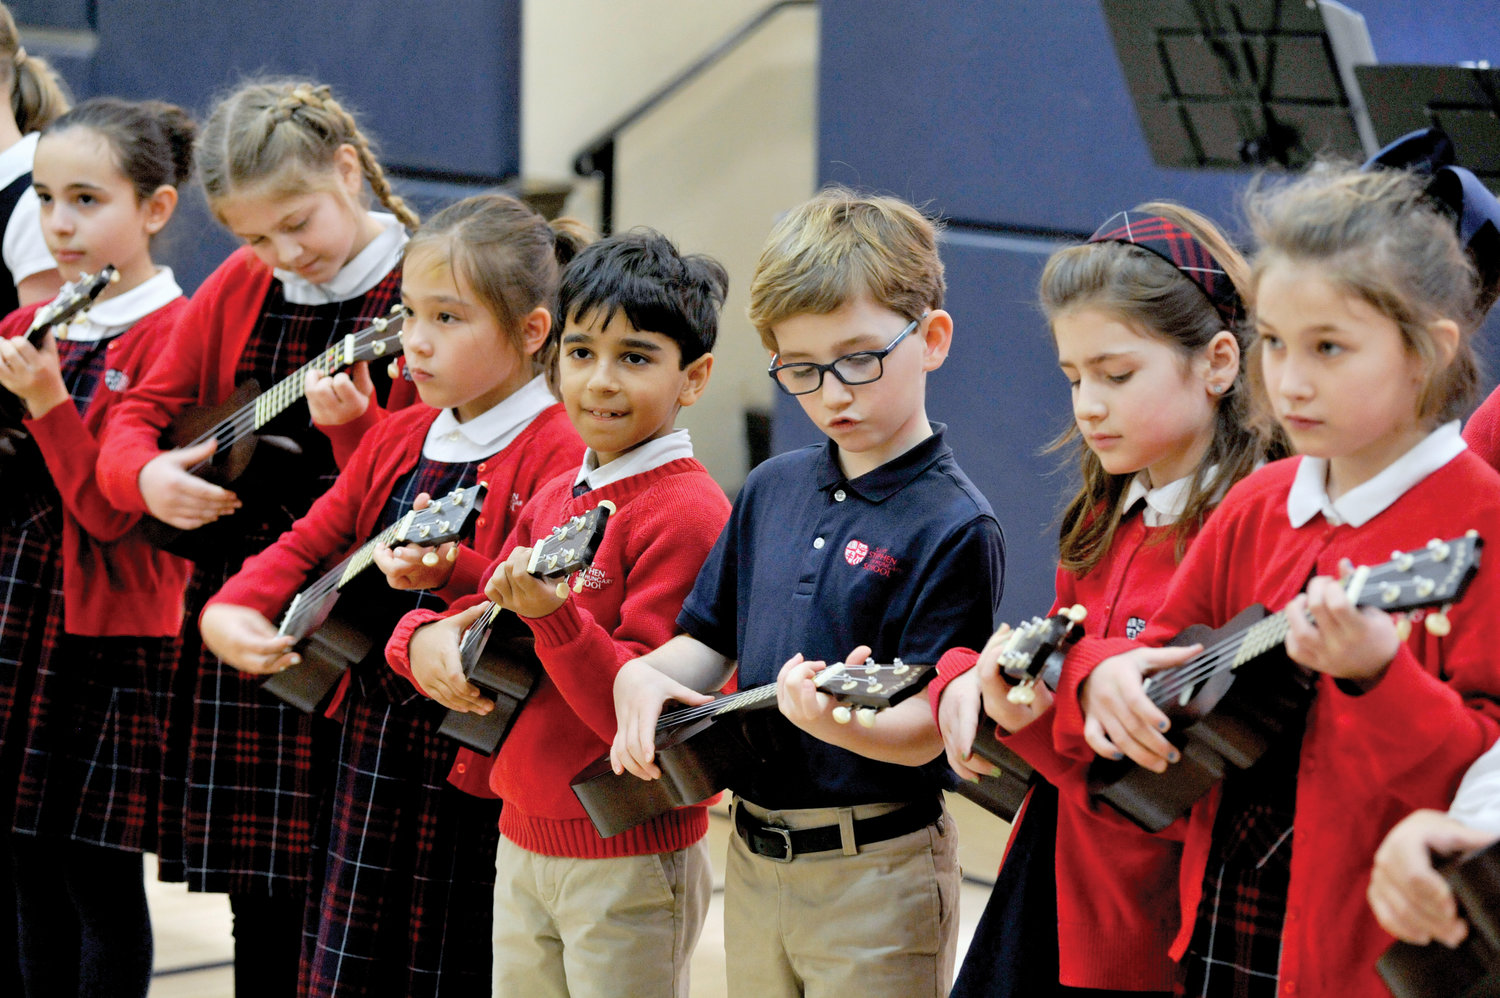 Youngsters play the ukulele during a reception.